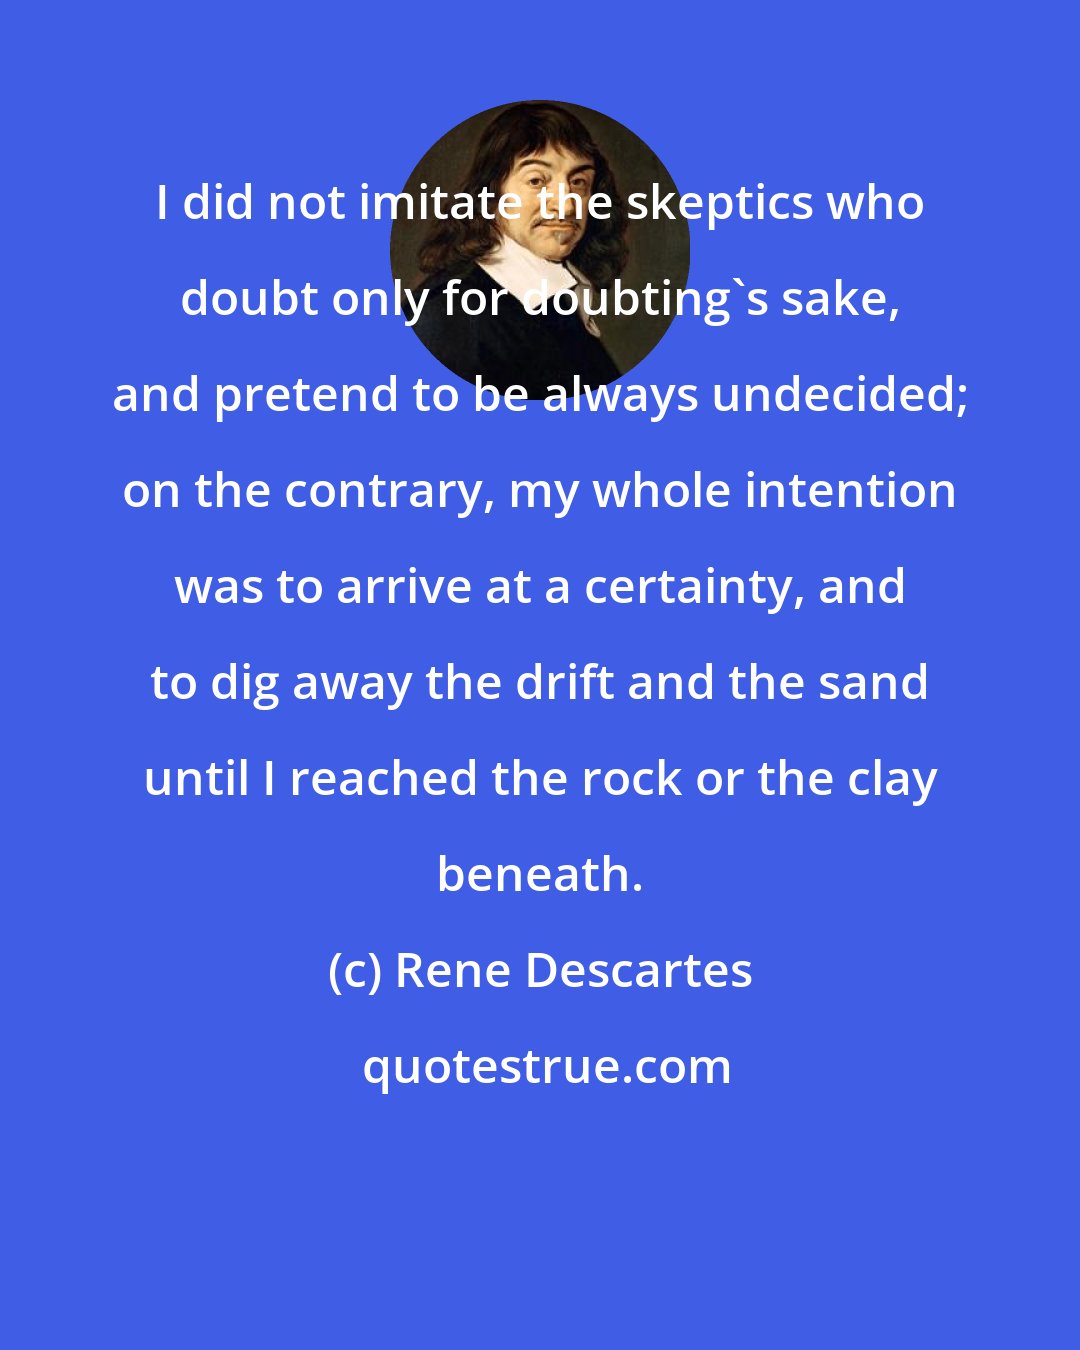 Rene Descartes: I did not imitate the skeptics who doubt only for doubting's sake, and pretend to be always undecided; on the contrary, my whole intention was to arrive at a certainty, and to dig away the drift and the sand until I reached the rock or the clay beneath.